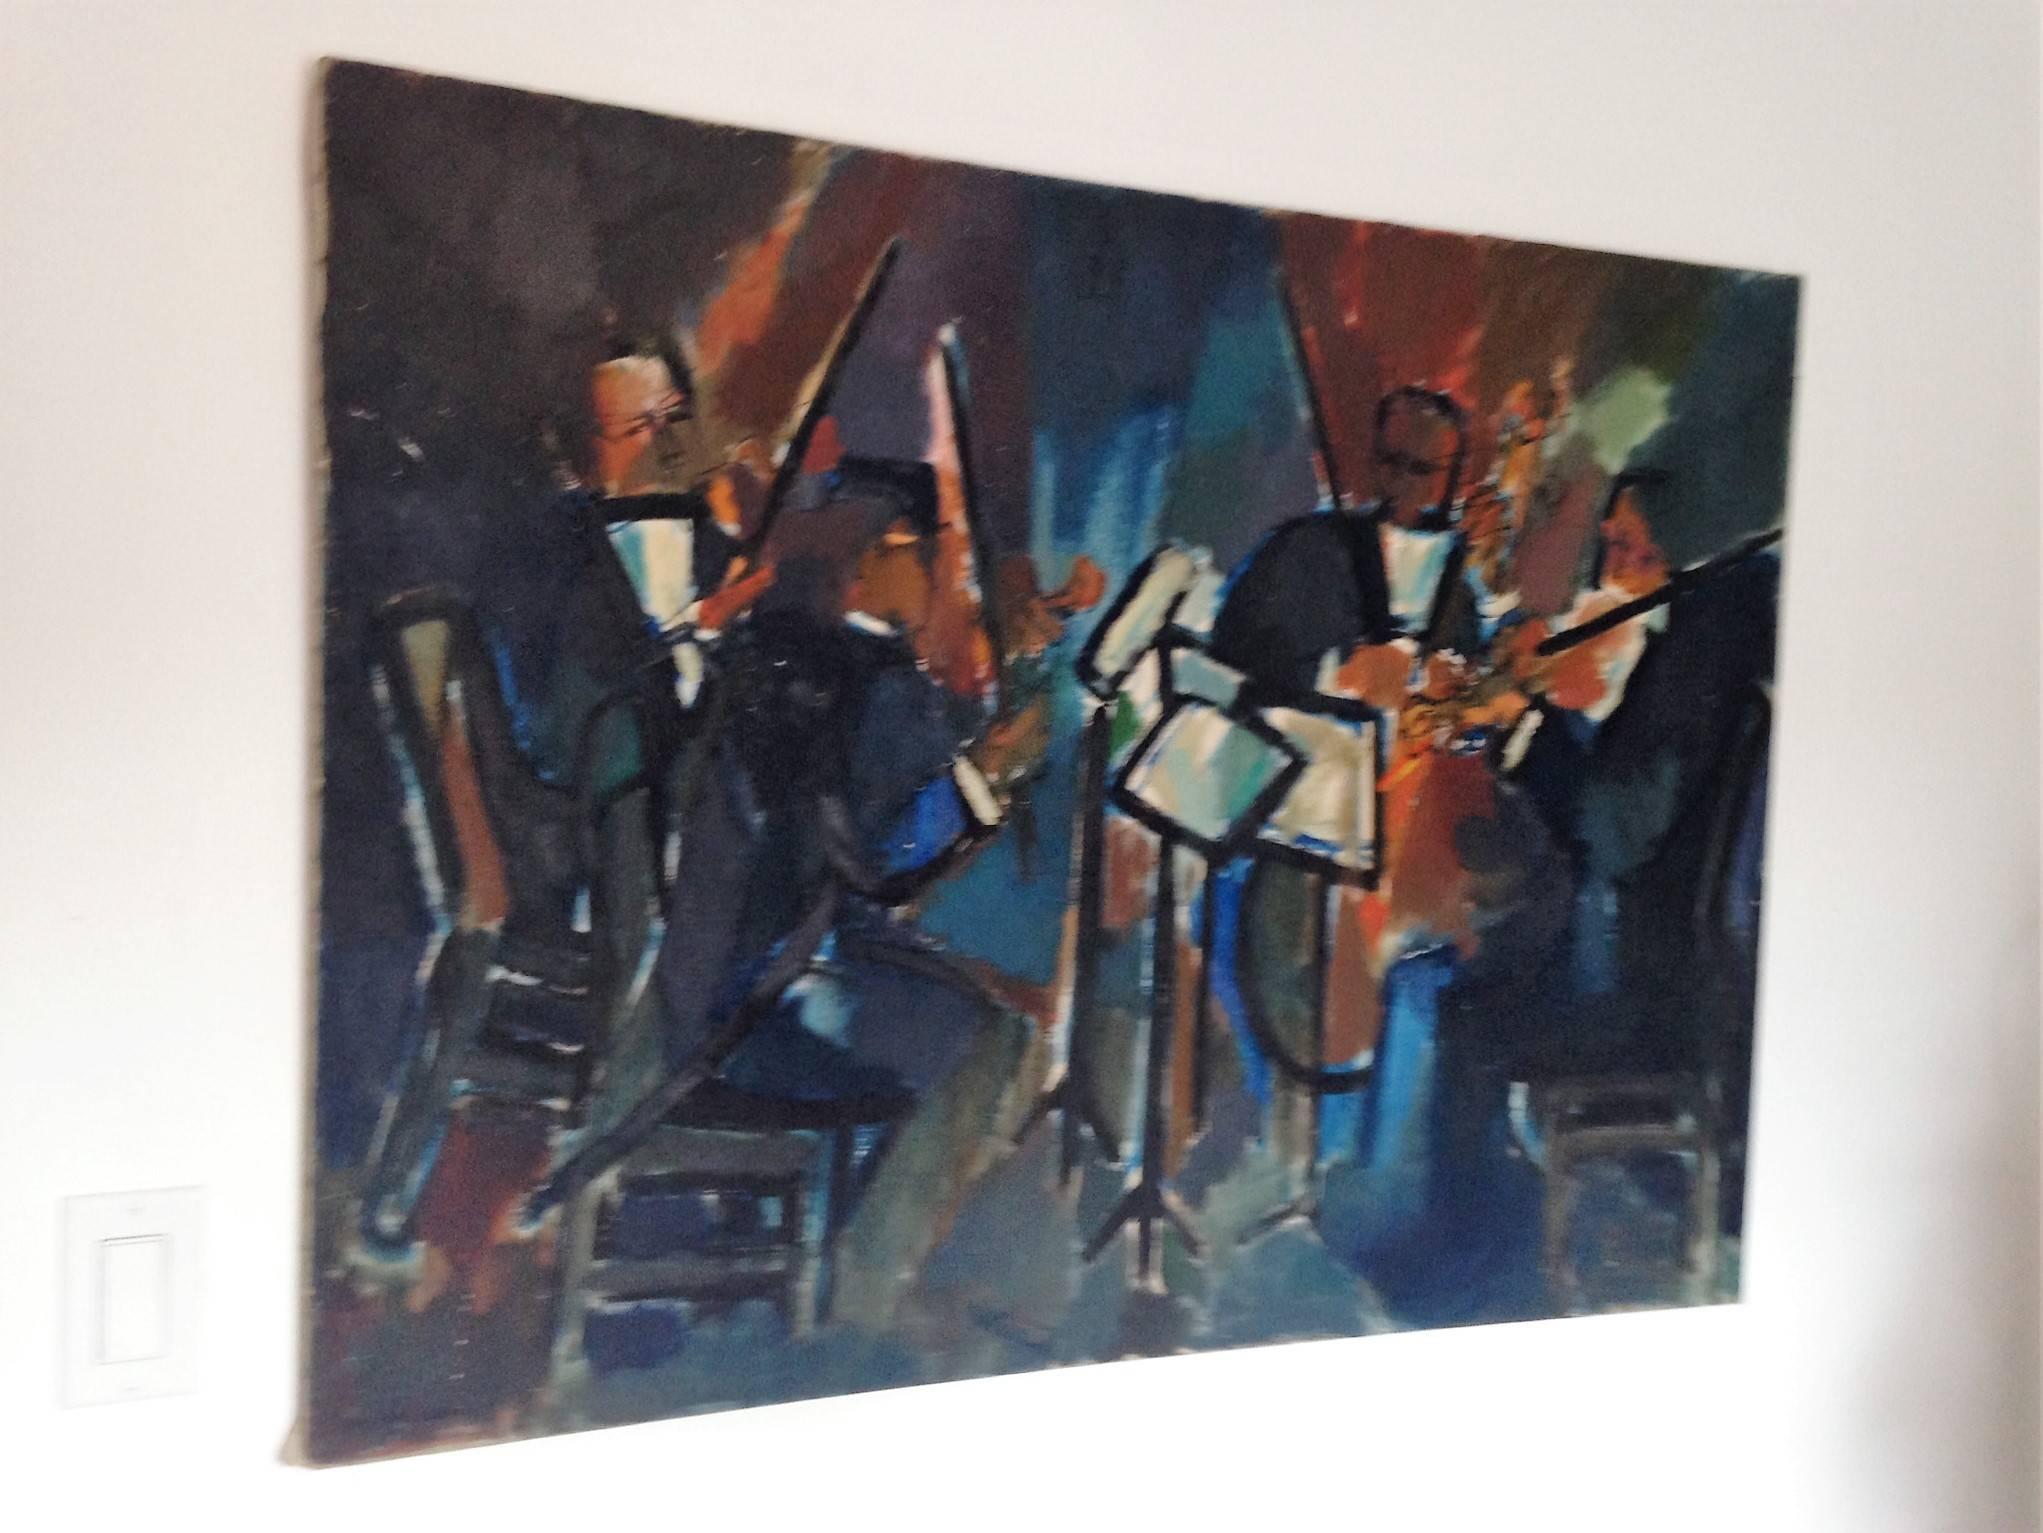 Nice muted tones of deep blue, white and black oil painting on canvas of jazz musicians signed Meyer Tannenbaum and dated 1956. A nice representative scene of musicians with great brush strokes. Great for a wall in your living room gallery space.